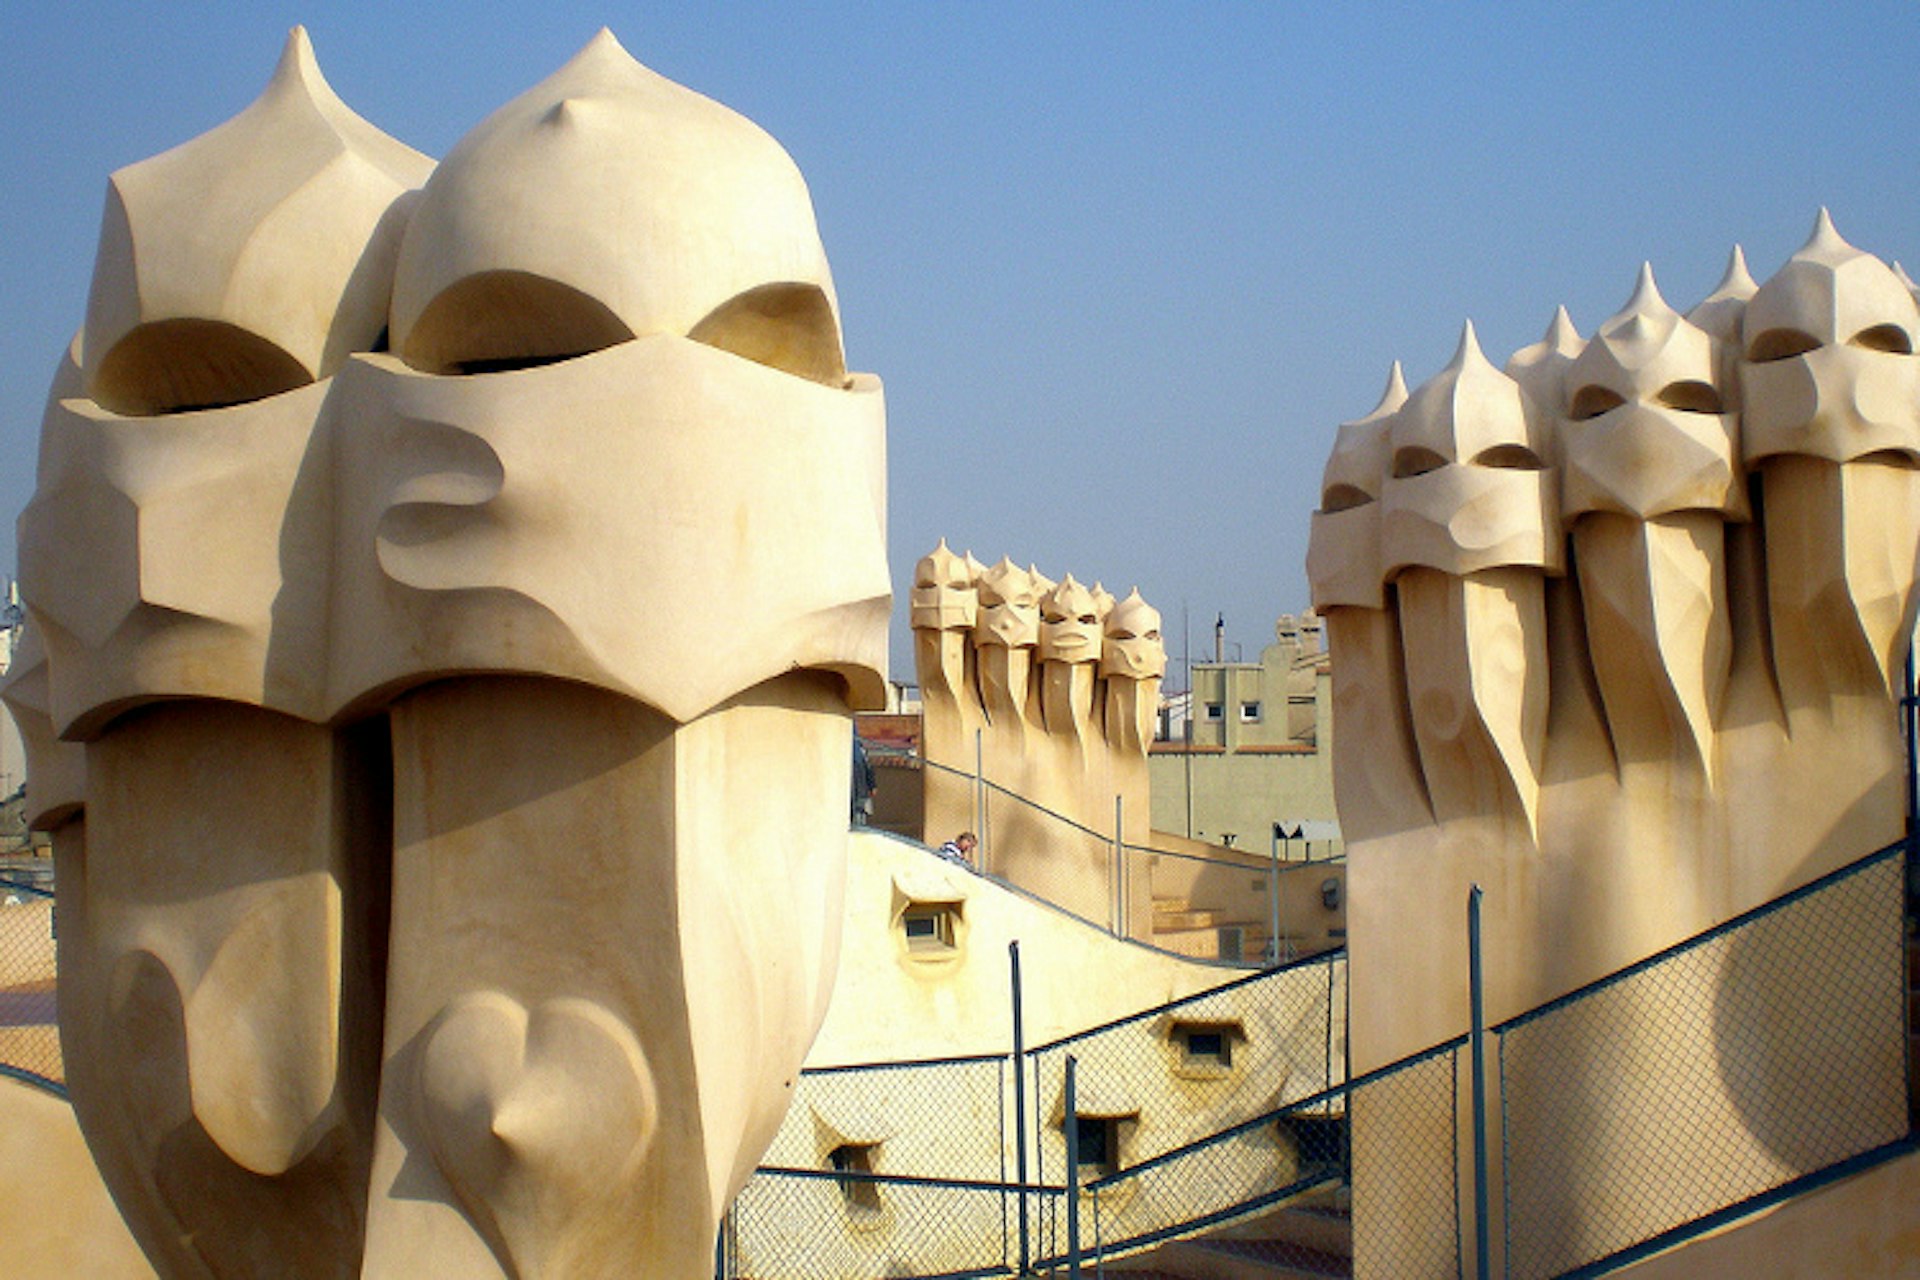 The surreal rooftop world of La Pedrera. Image by Jaume Meneses / CC BY-SA 2.0